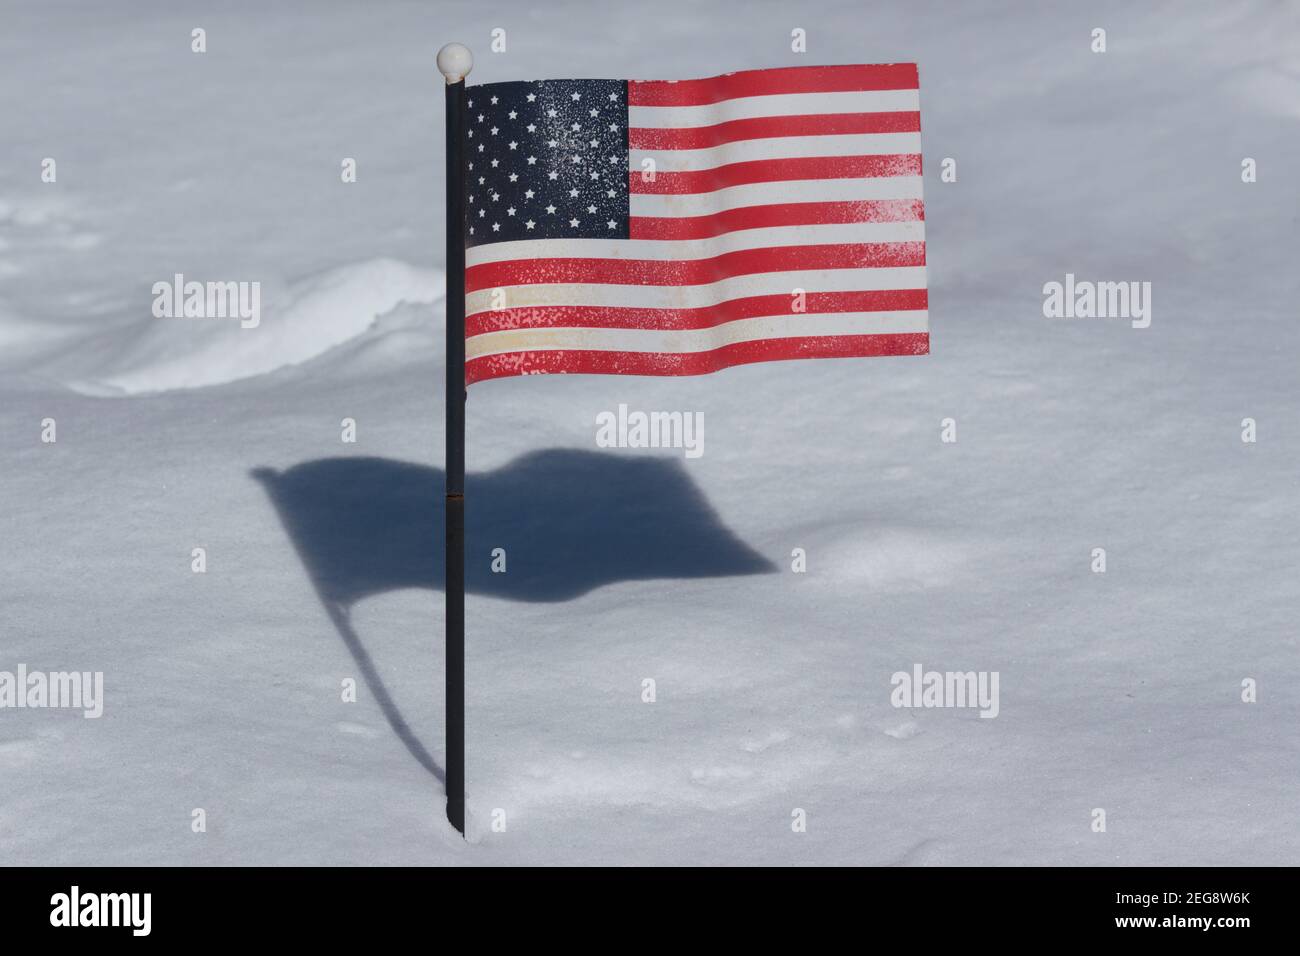 an American flag planted in a snow covered ground on a very sunny day with a strong cast shadow behind it Stock Photo